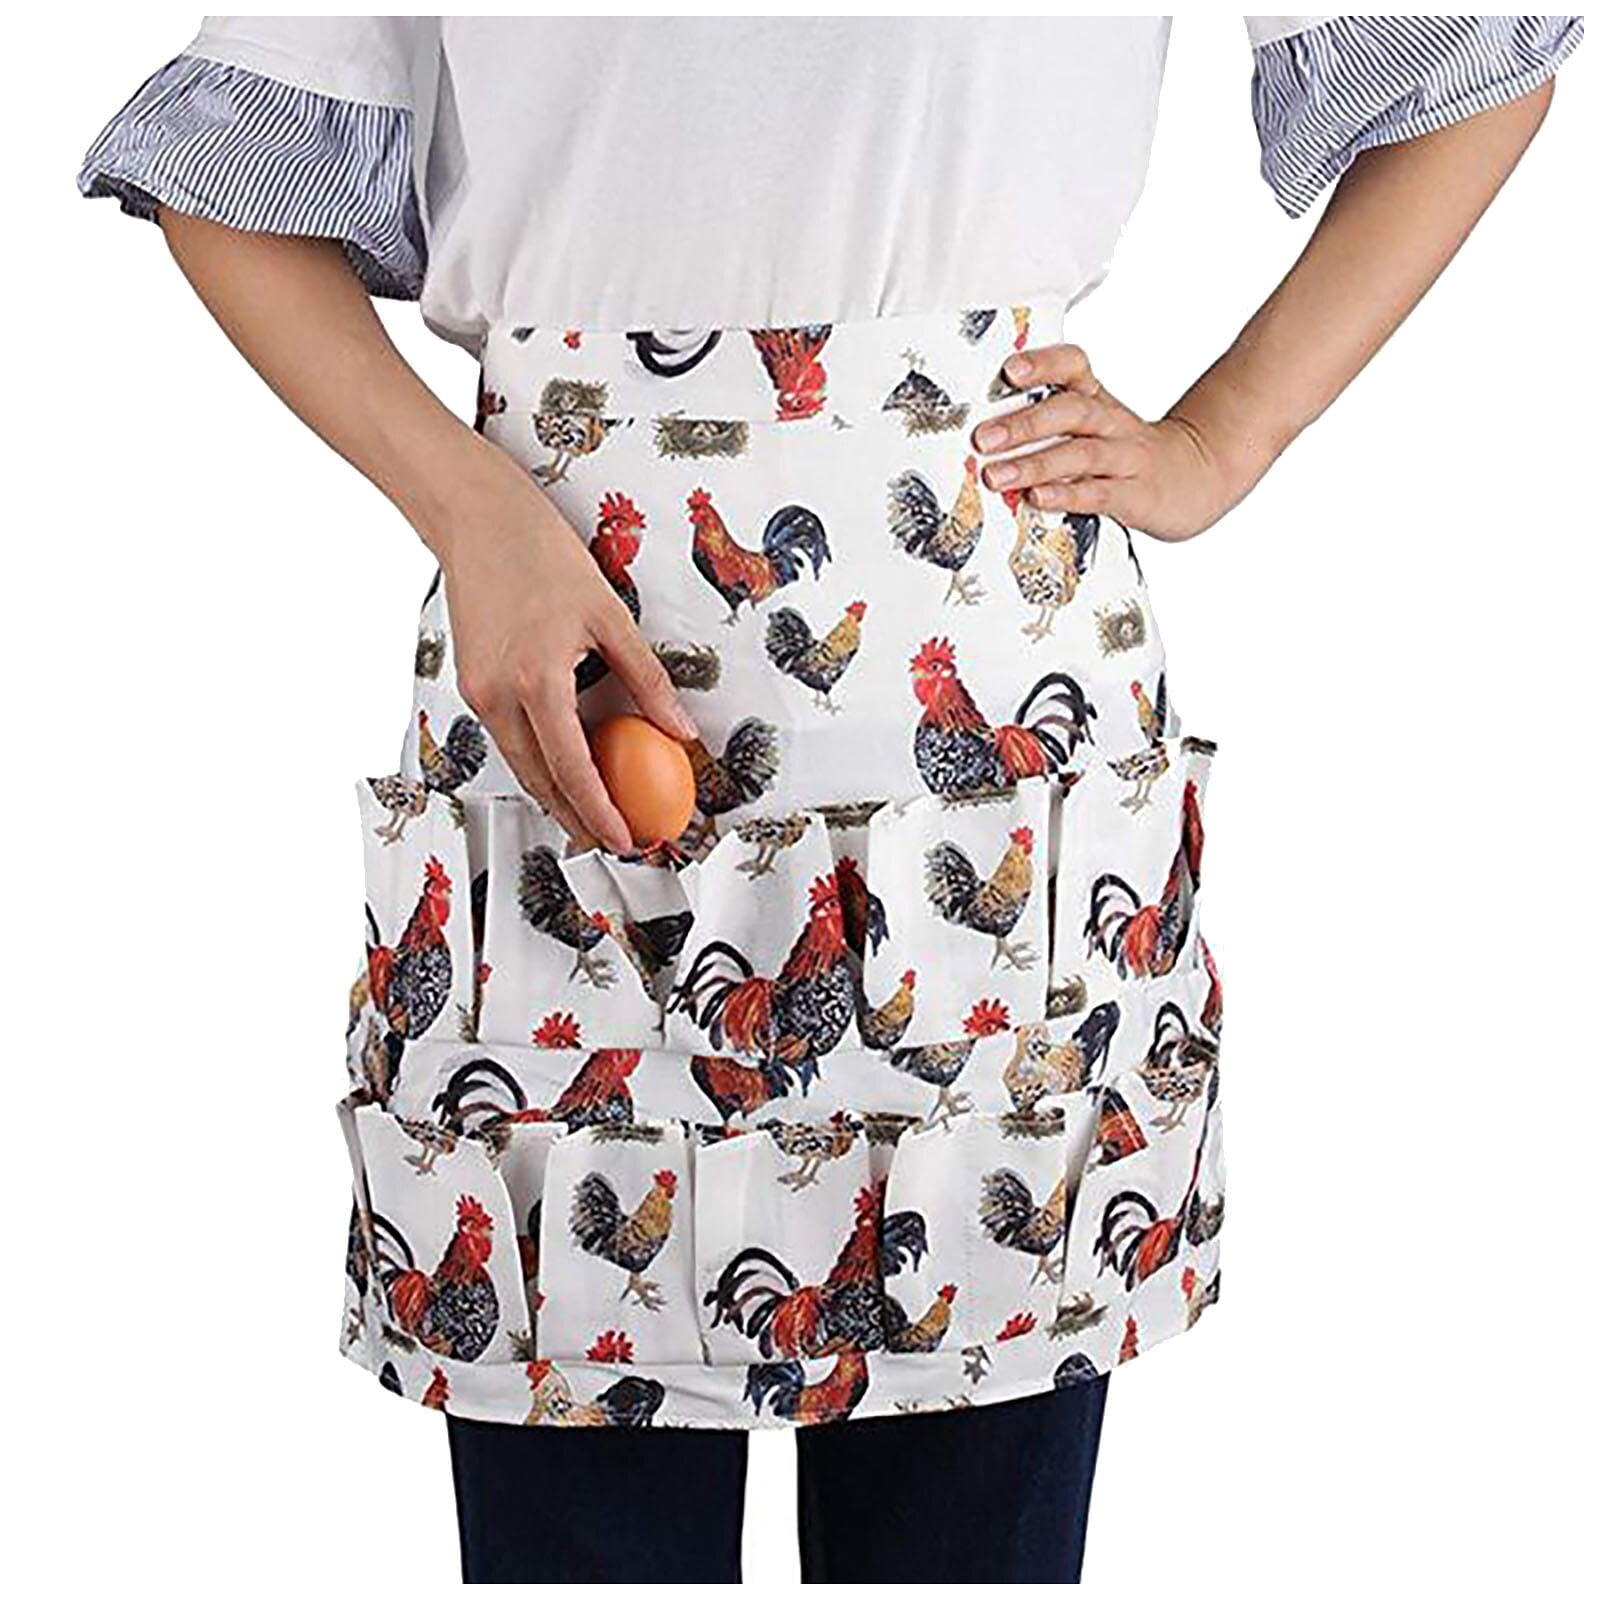 1pc Chicken Egg Apron, 12 Deep Pockets Hen Duck Goose Eggs Holder Aprons  Eggs Collecting Gathering Holding Apron For Farmhouse Kitchen Home Workwear